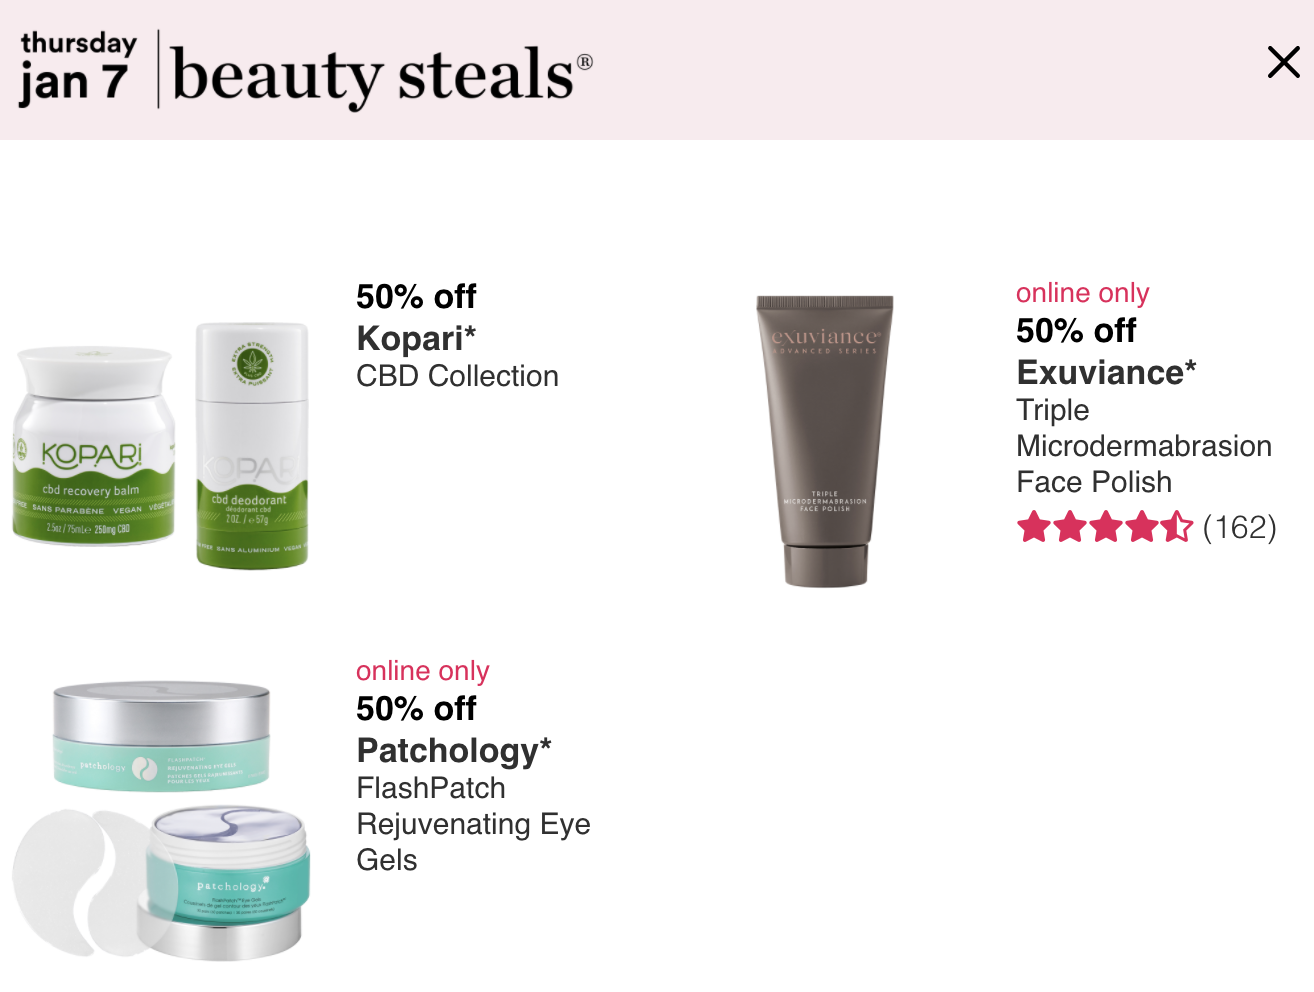 Ulta: Love Your Skin Event - Day 5(tomorrow 1/7) - Gift With Purchase